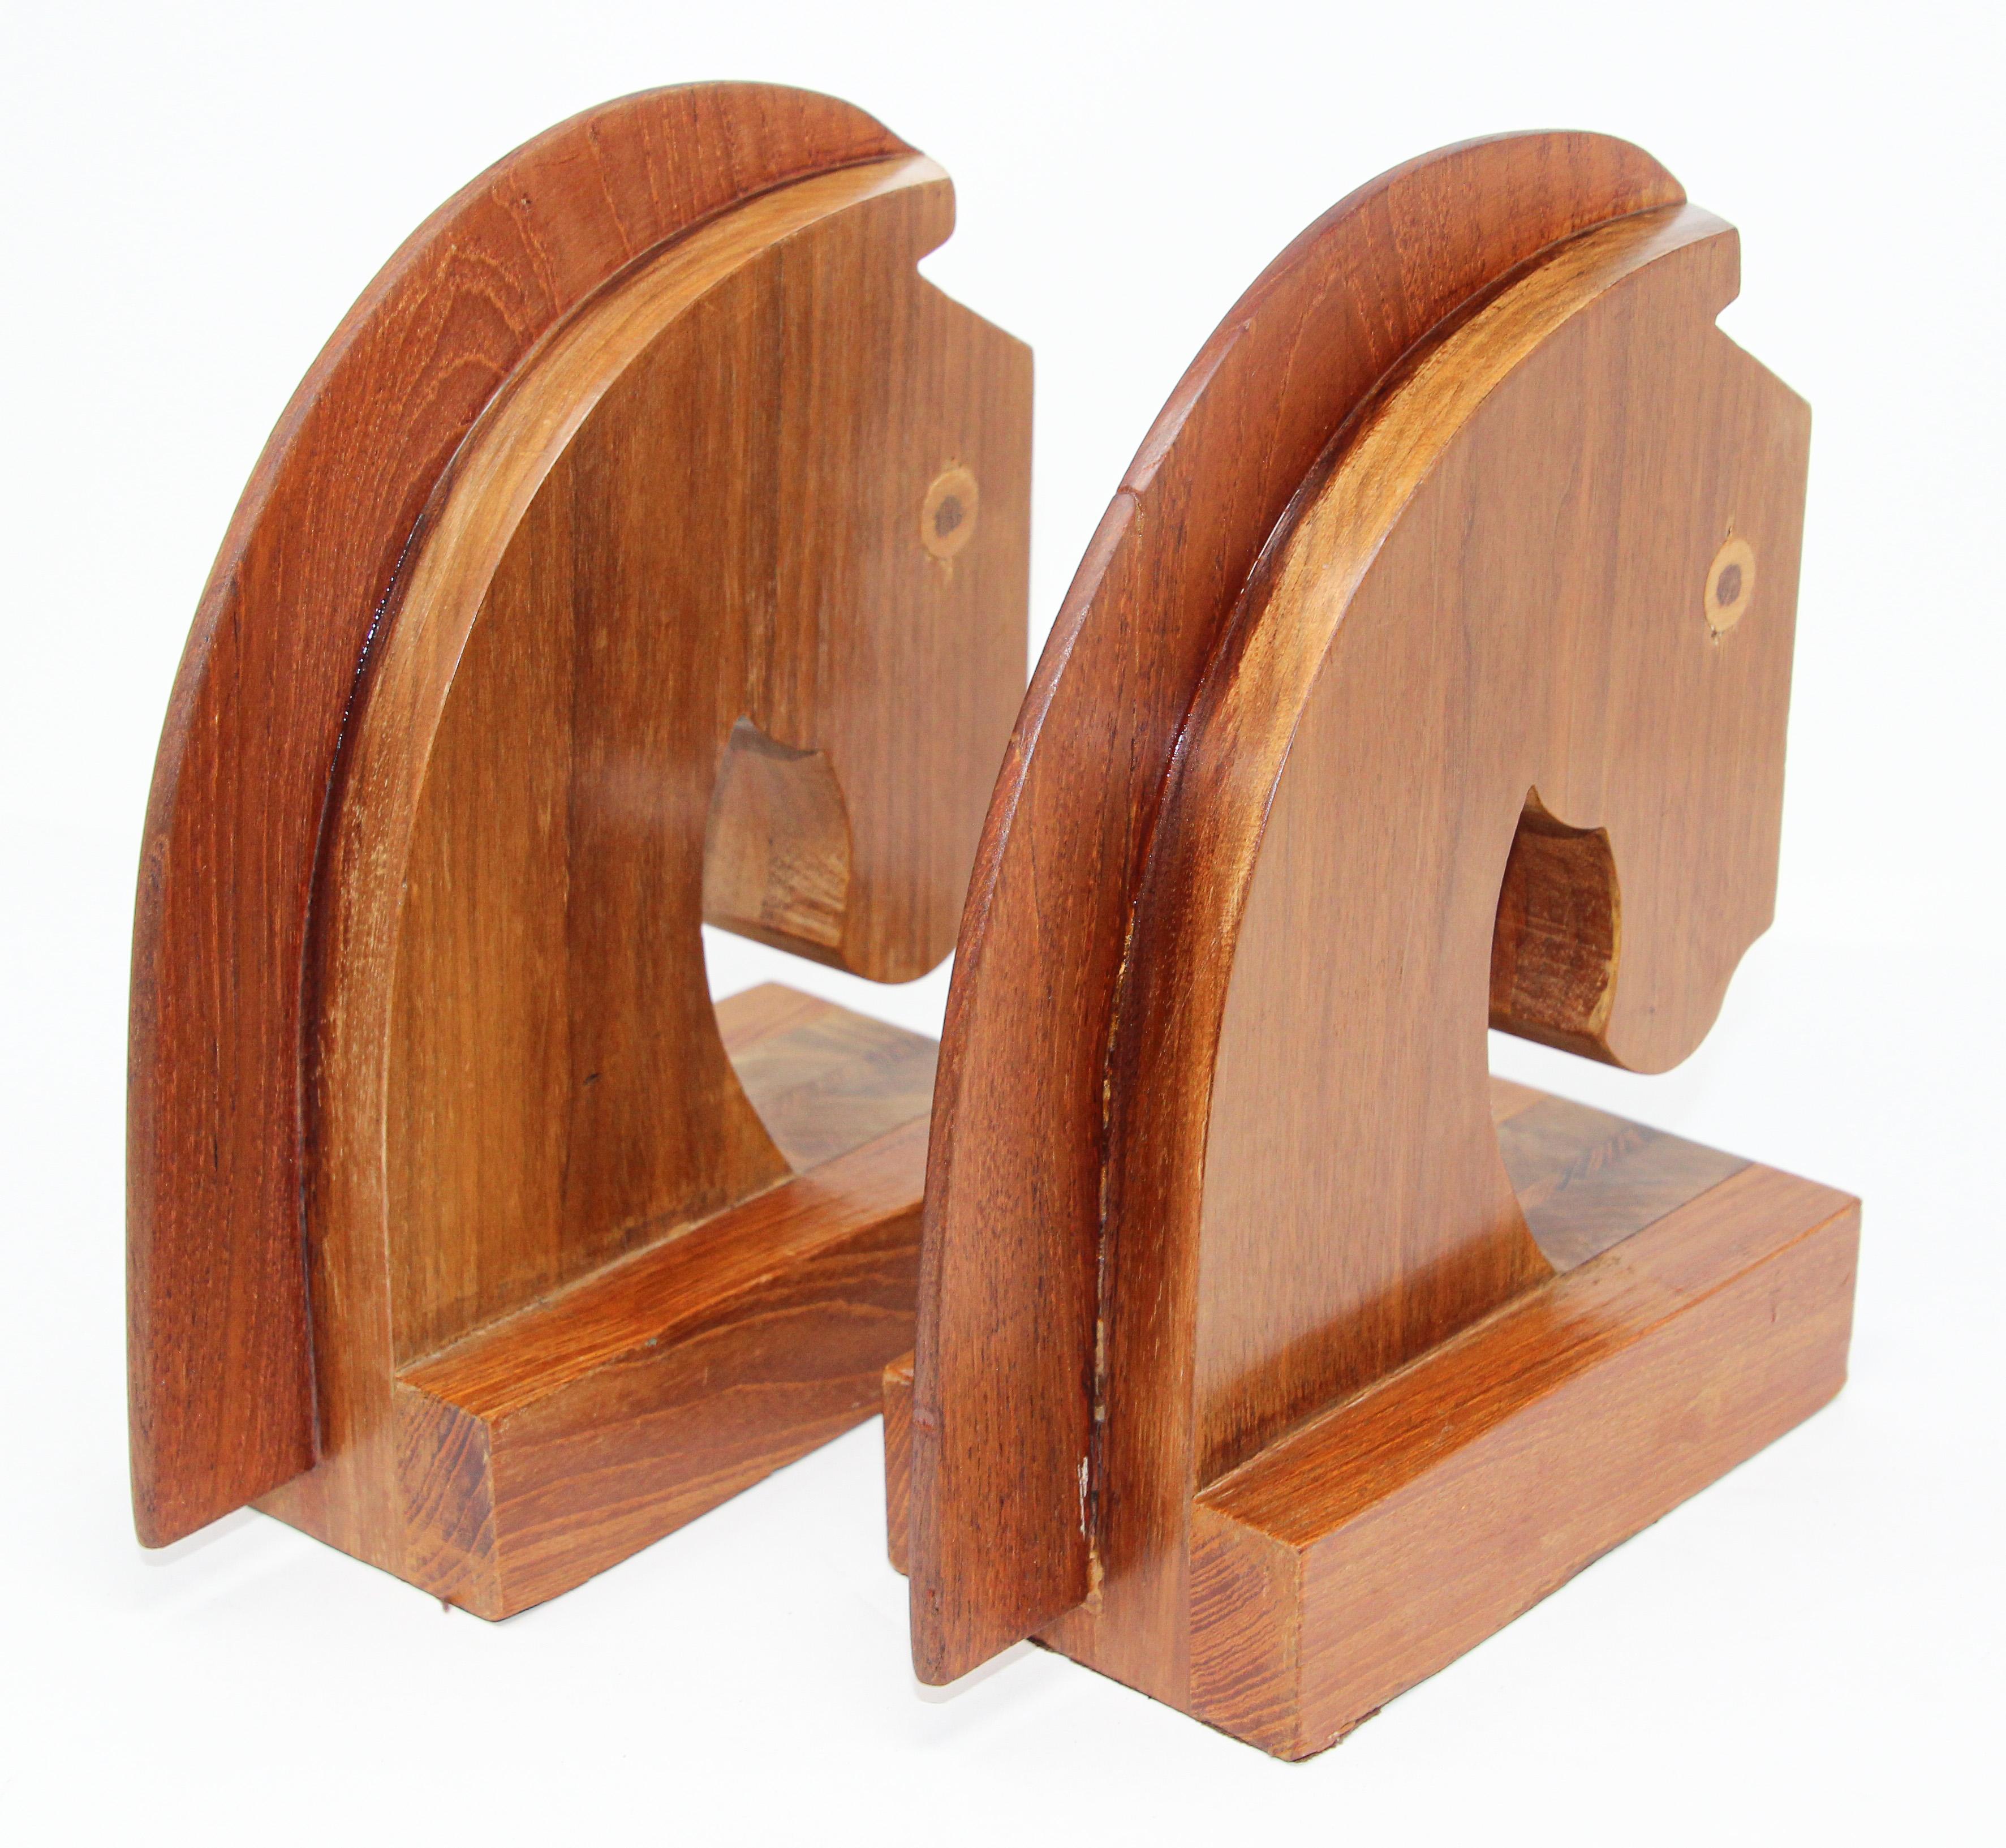 Hand-Crafted Art Deco Stylized Wood Sculptures of Horse Bust Bookends For Sale